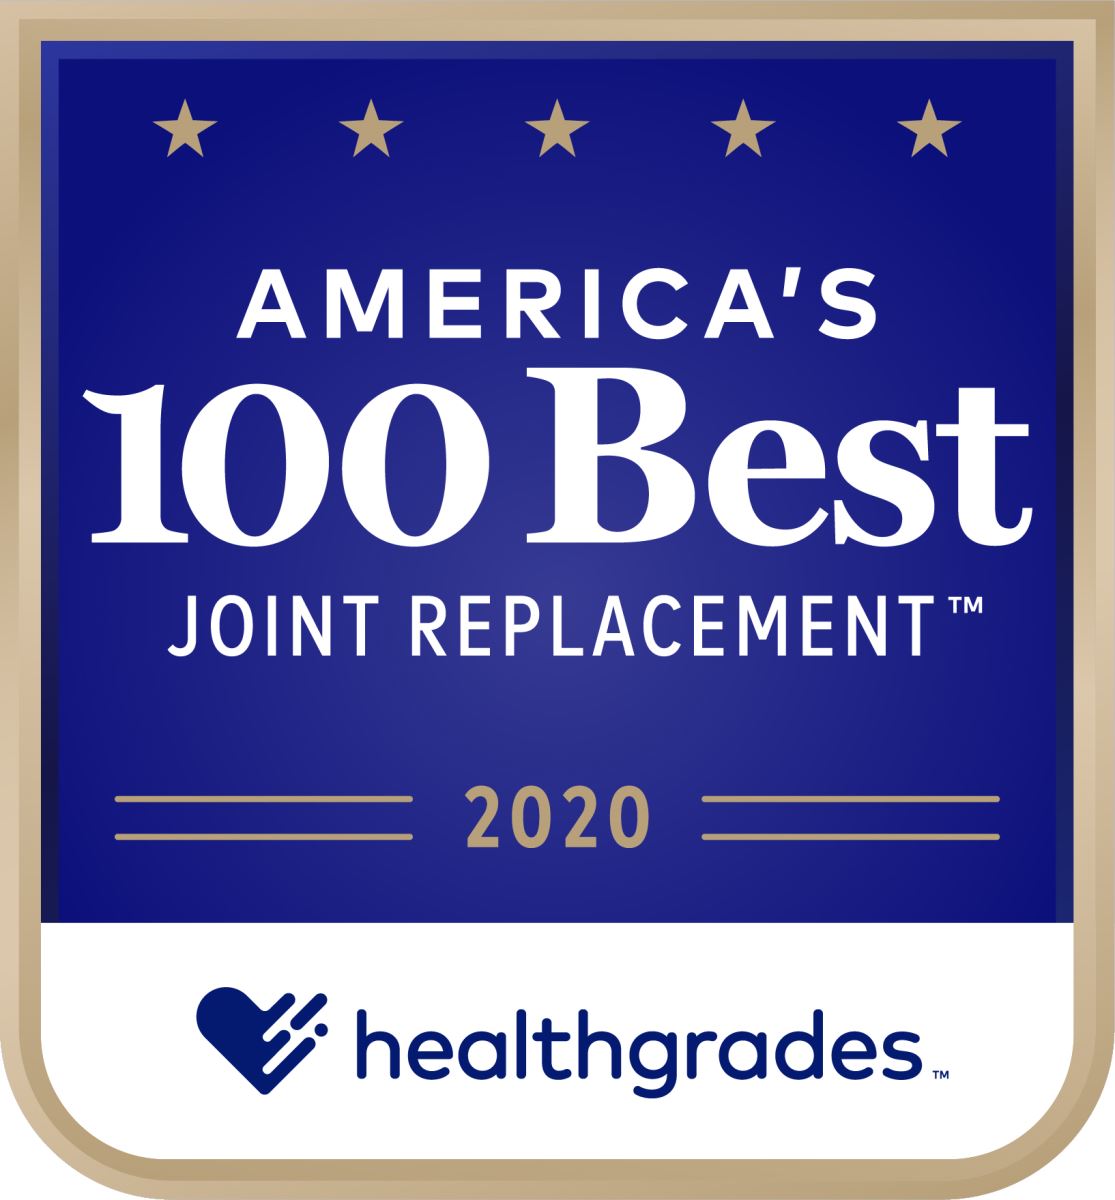 America's 100 Best Joint Replacement 2020